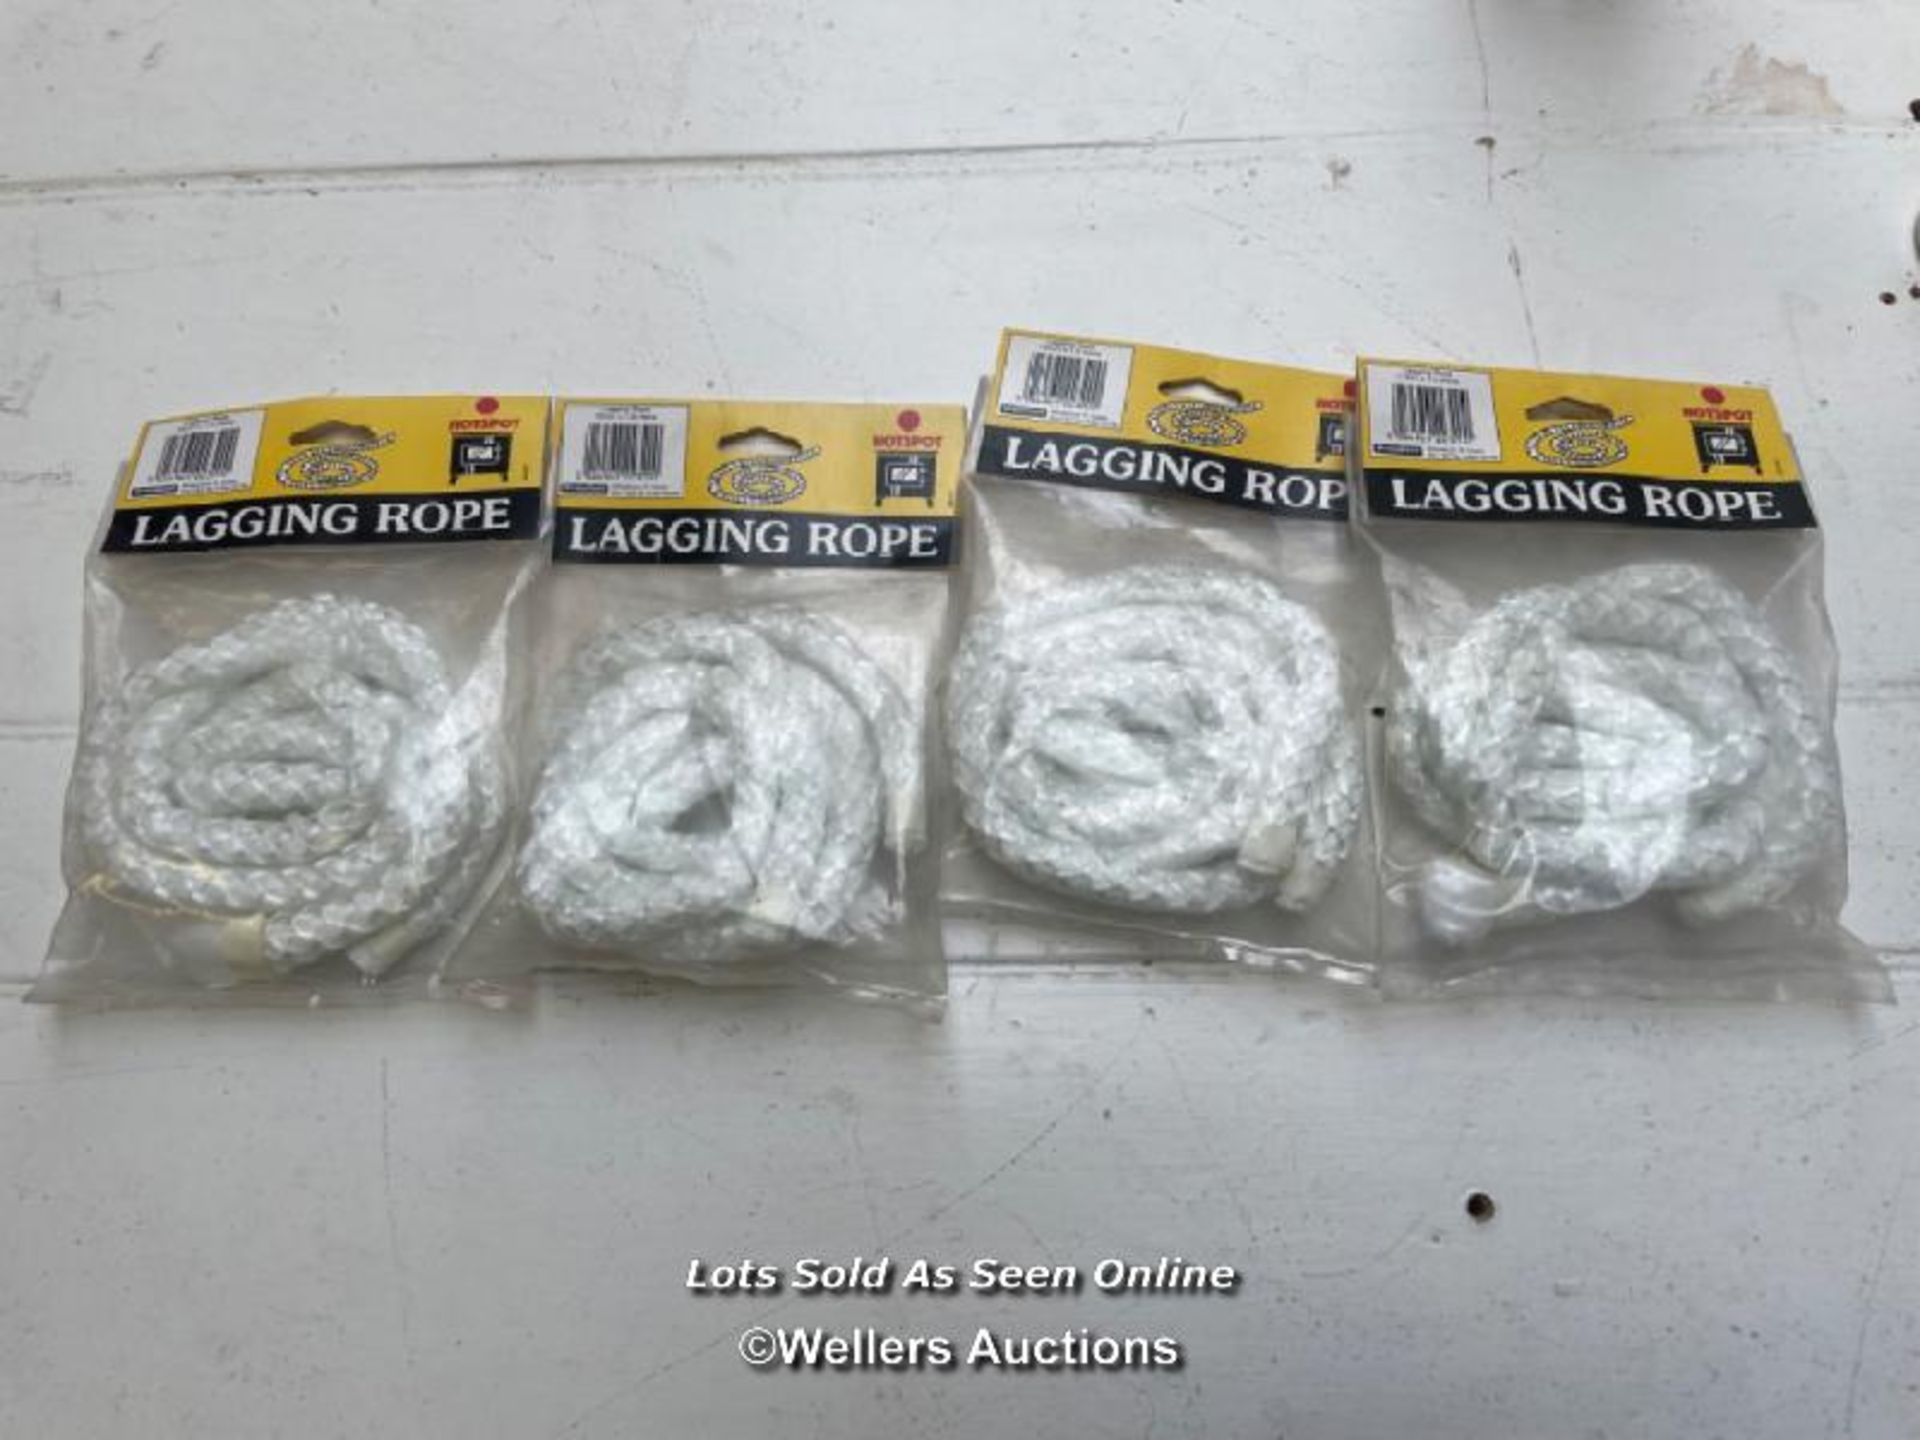 Fireplace spares. Lagging rope for fire proofing stoves. 5 x magnetic thermometers. 2 x marble